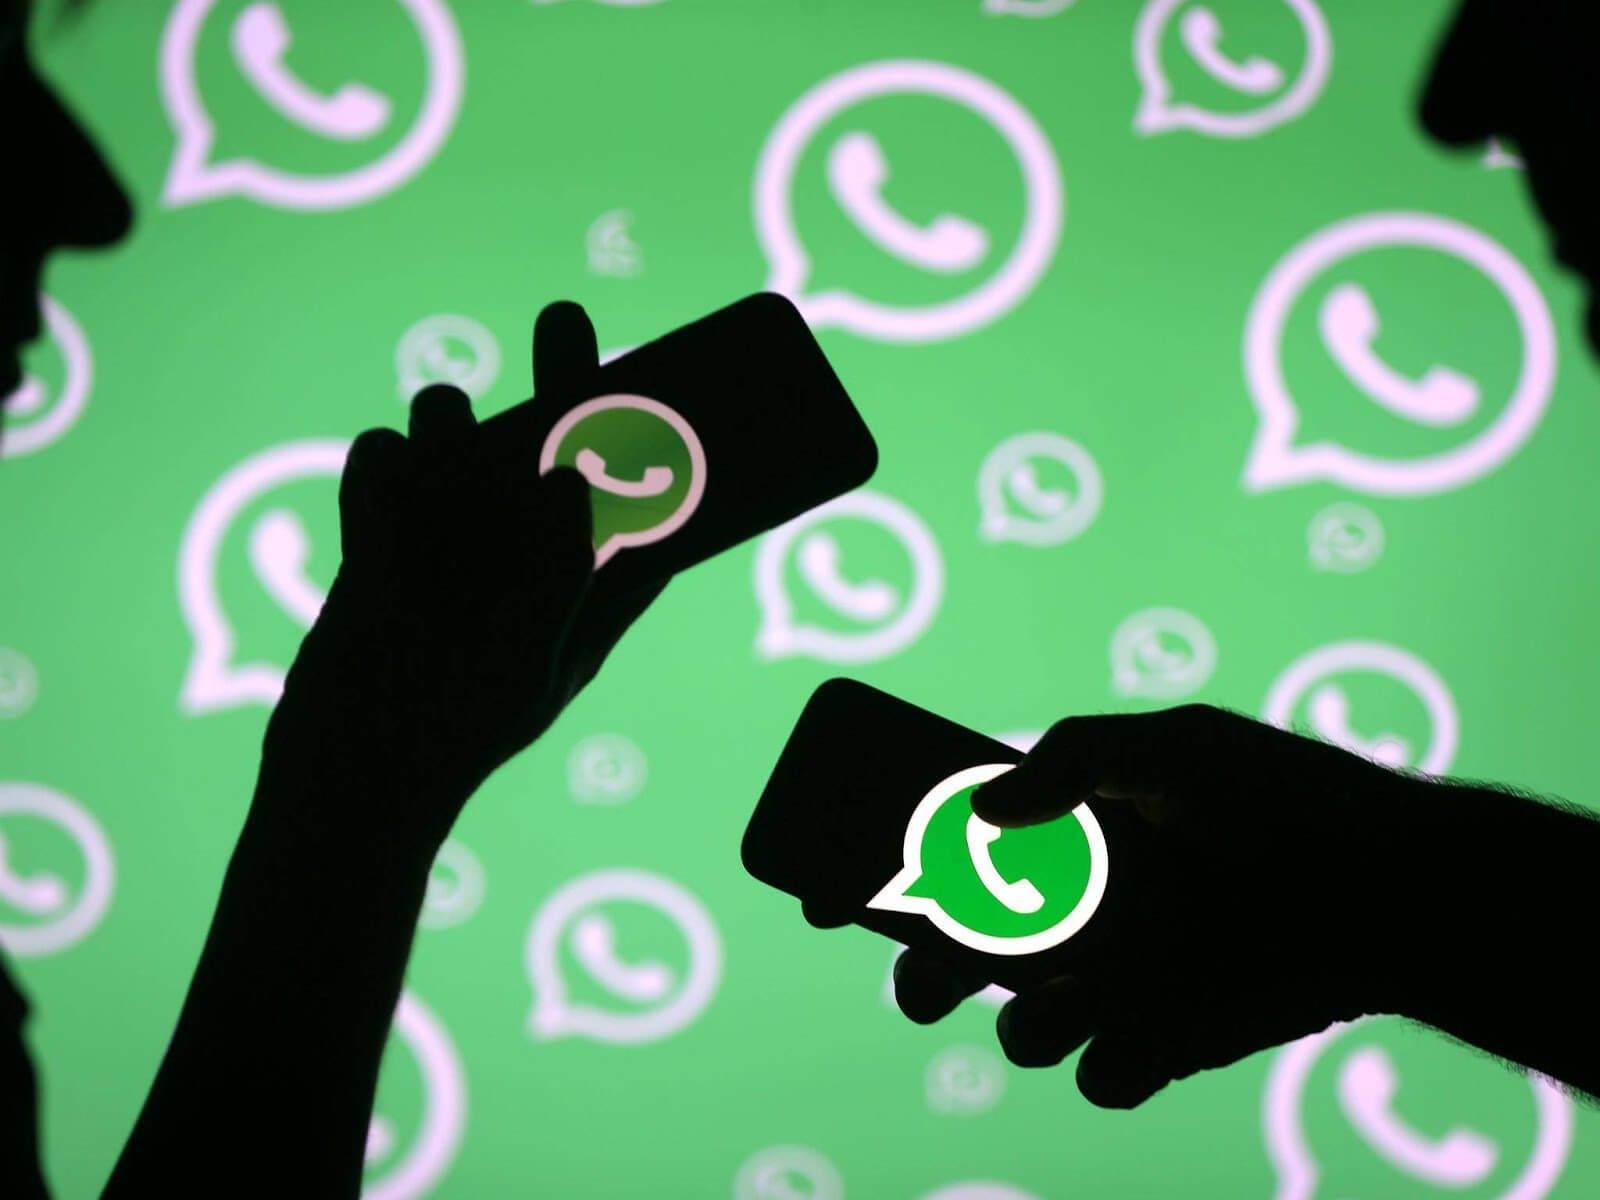 WhatsApp vulnerability allowed spyware to infiltrate phones